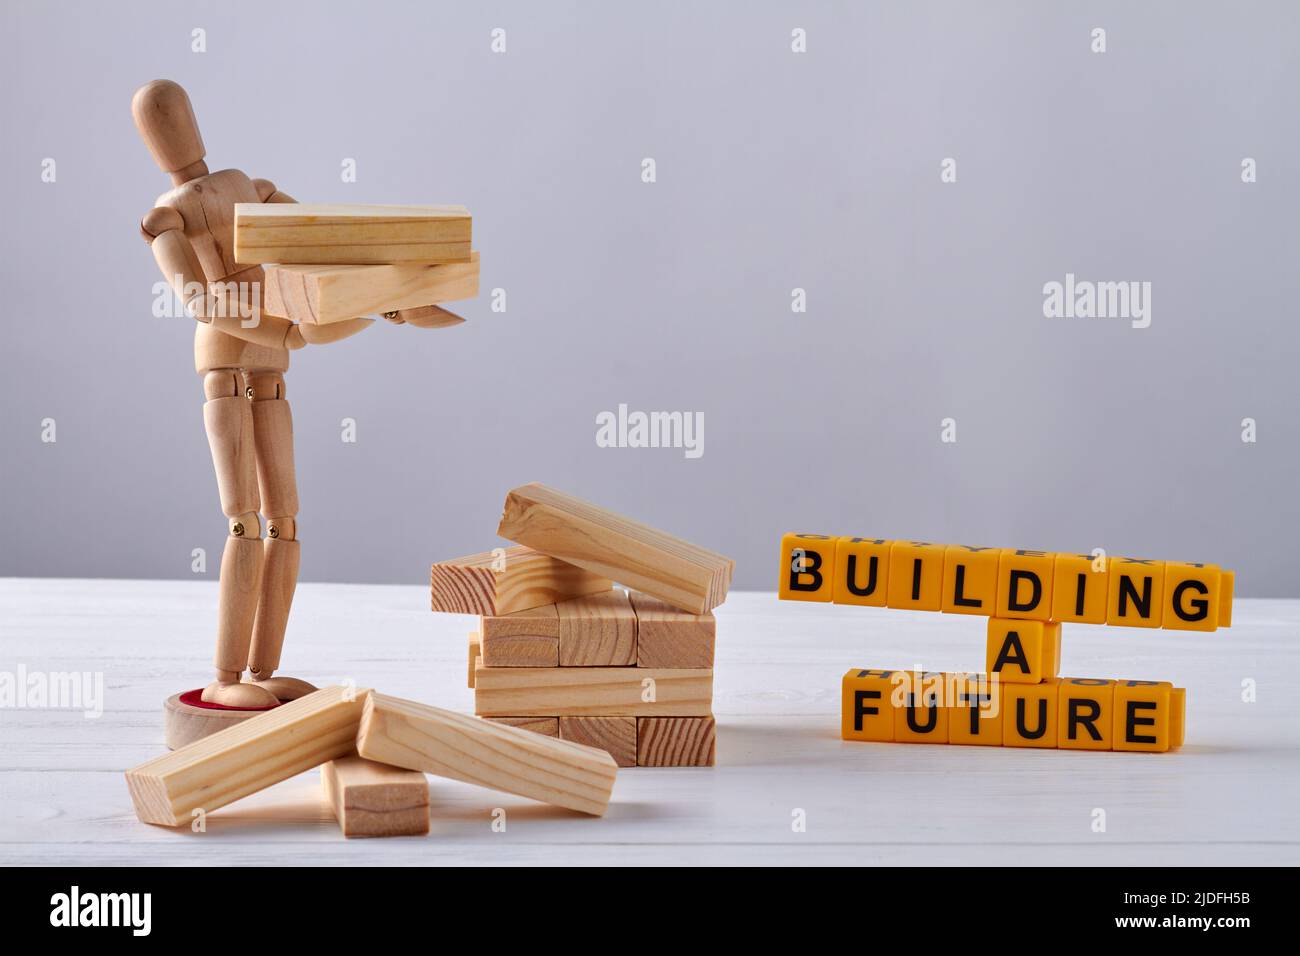 Wooden mannequin holding blocks on white background. Building a future concept. Stock Photo